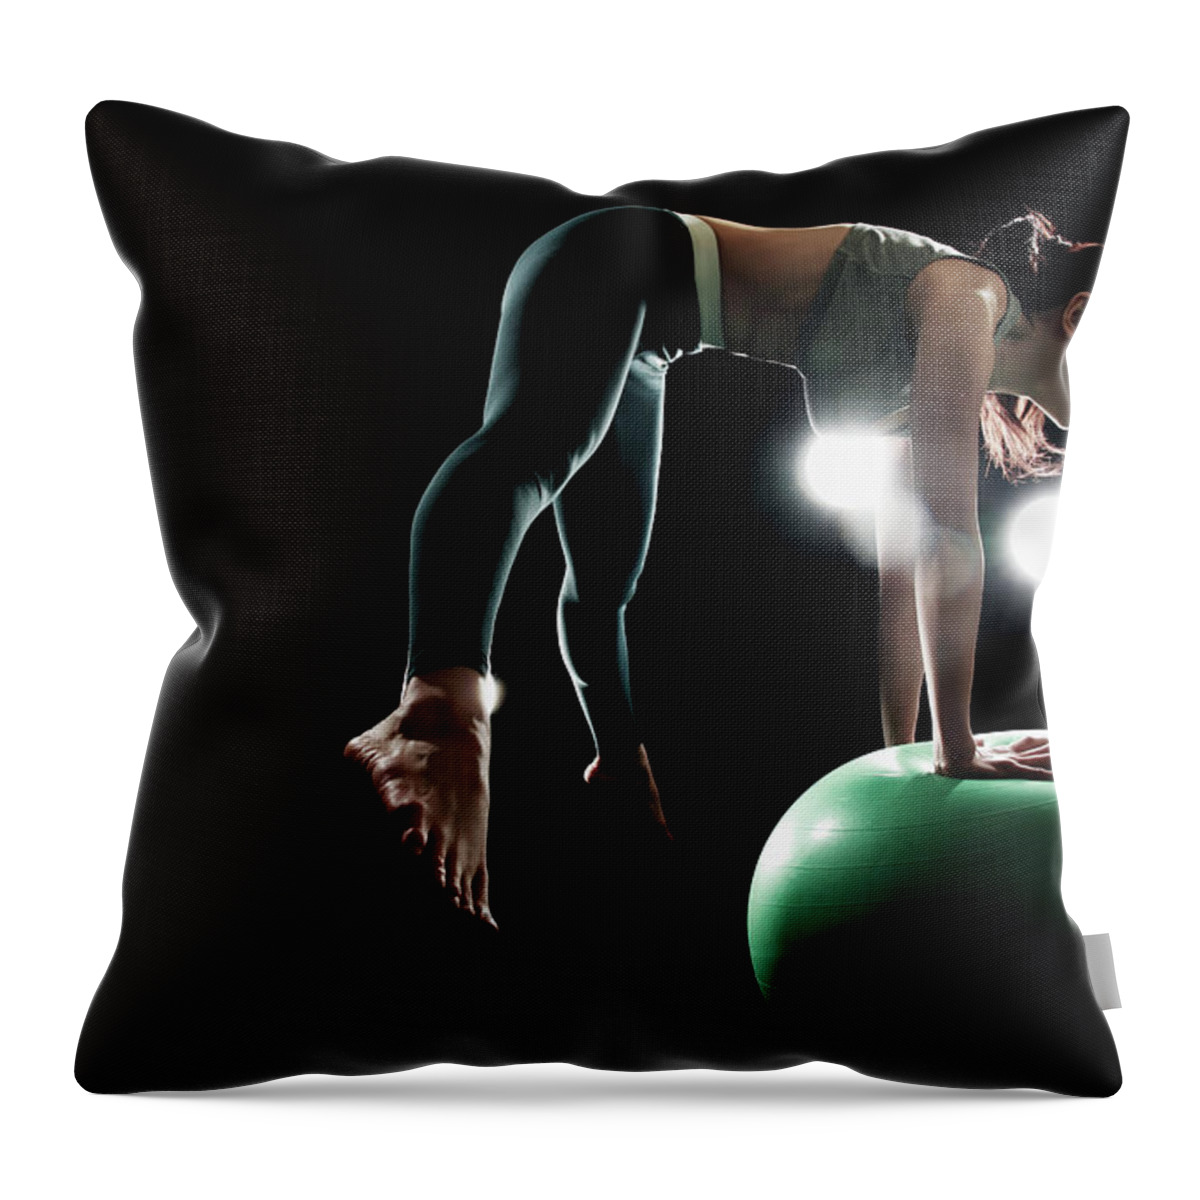 People Throw Pillow featuring the photograph Young Woman Exercising With Fitness Ball by Runphoto